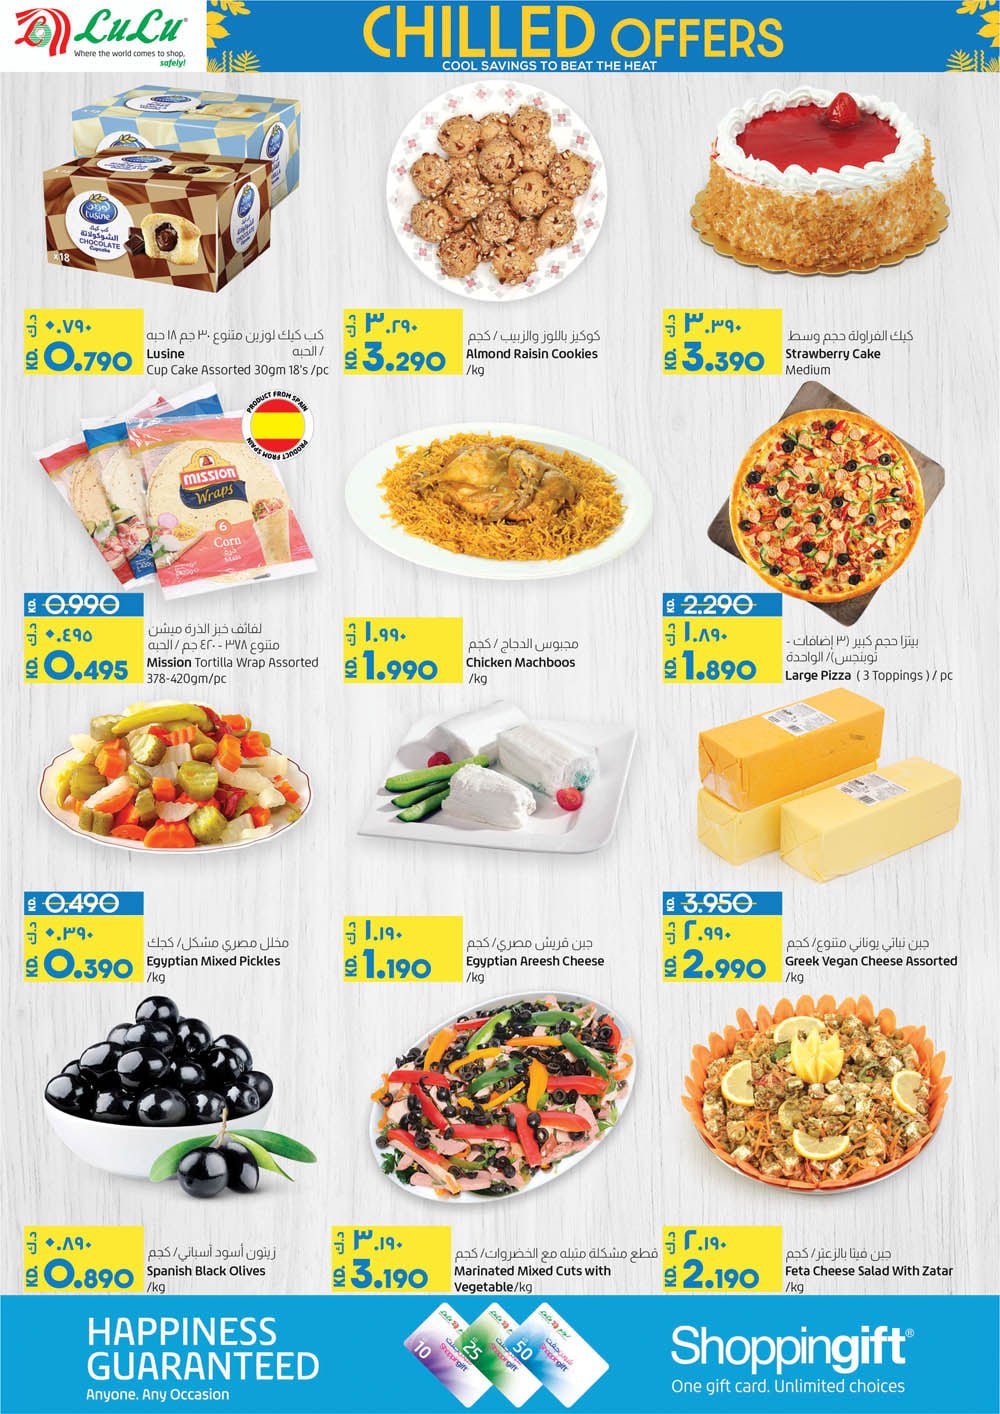 Lulu Hypermarket Chilled Offers, iiQ8 weekly promotions 9